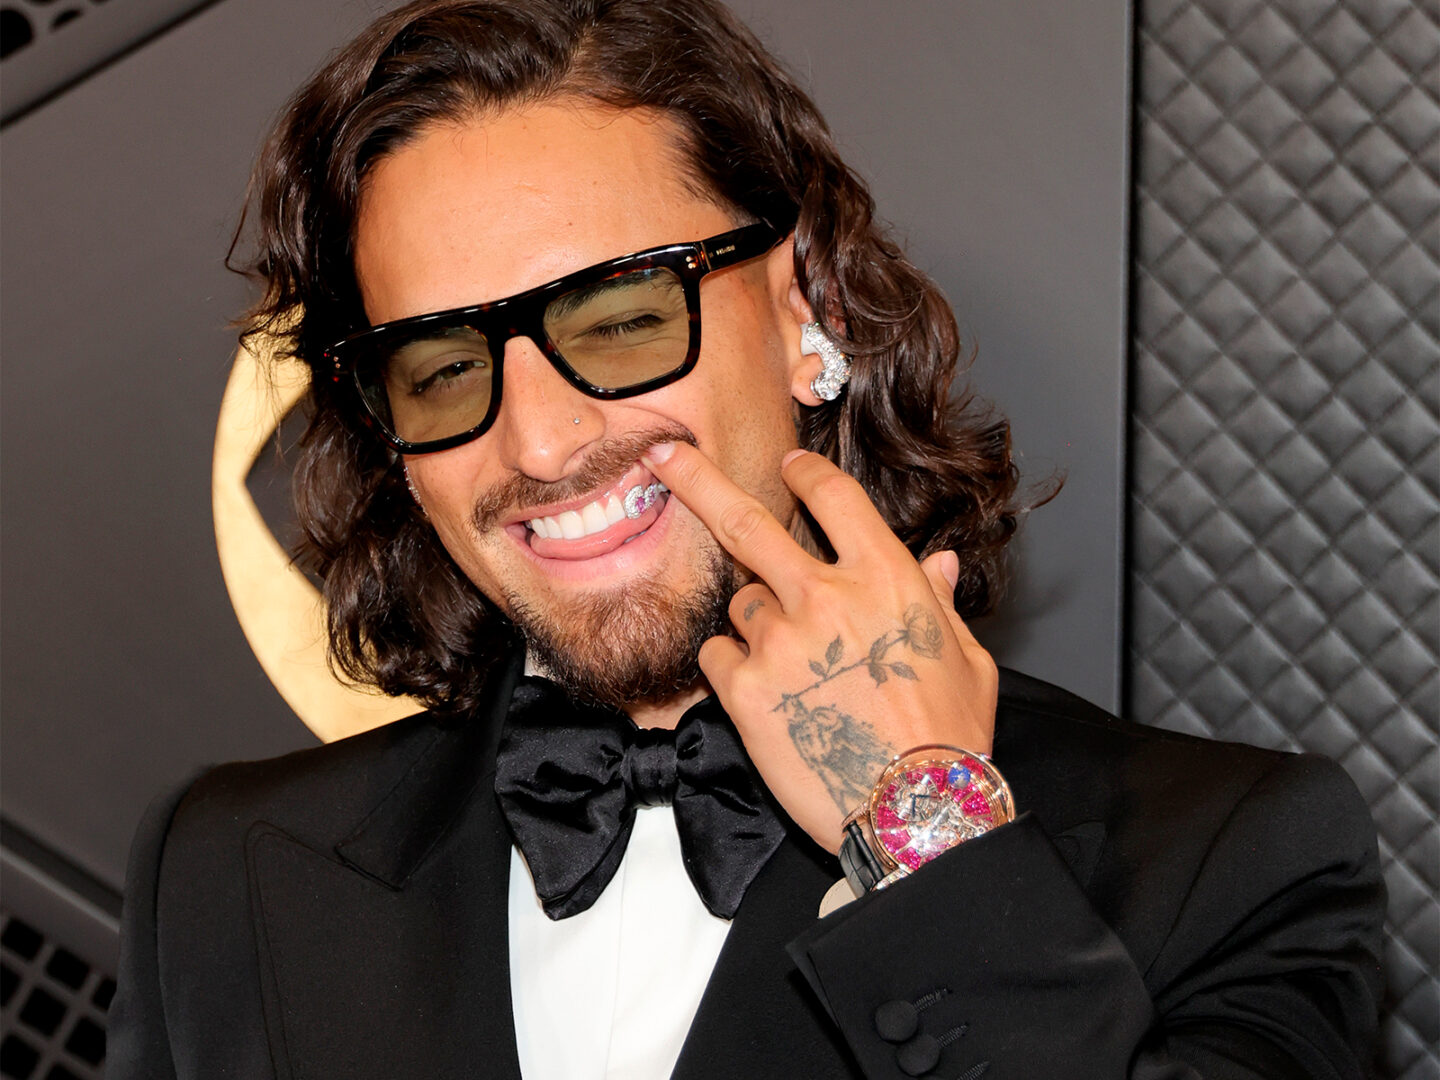 Maluma wore the most expensive watch at the Grammy Awards gala